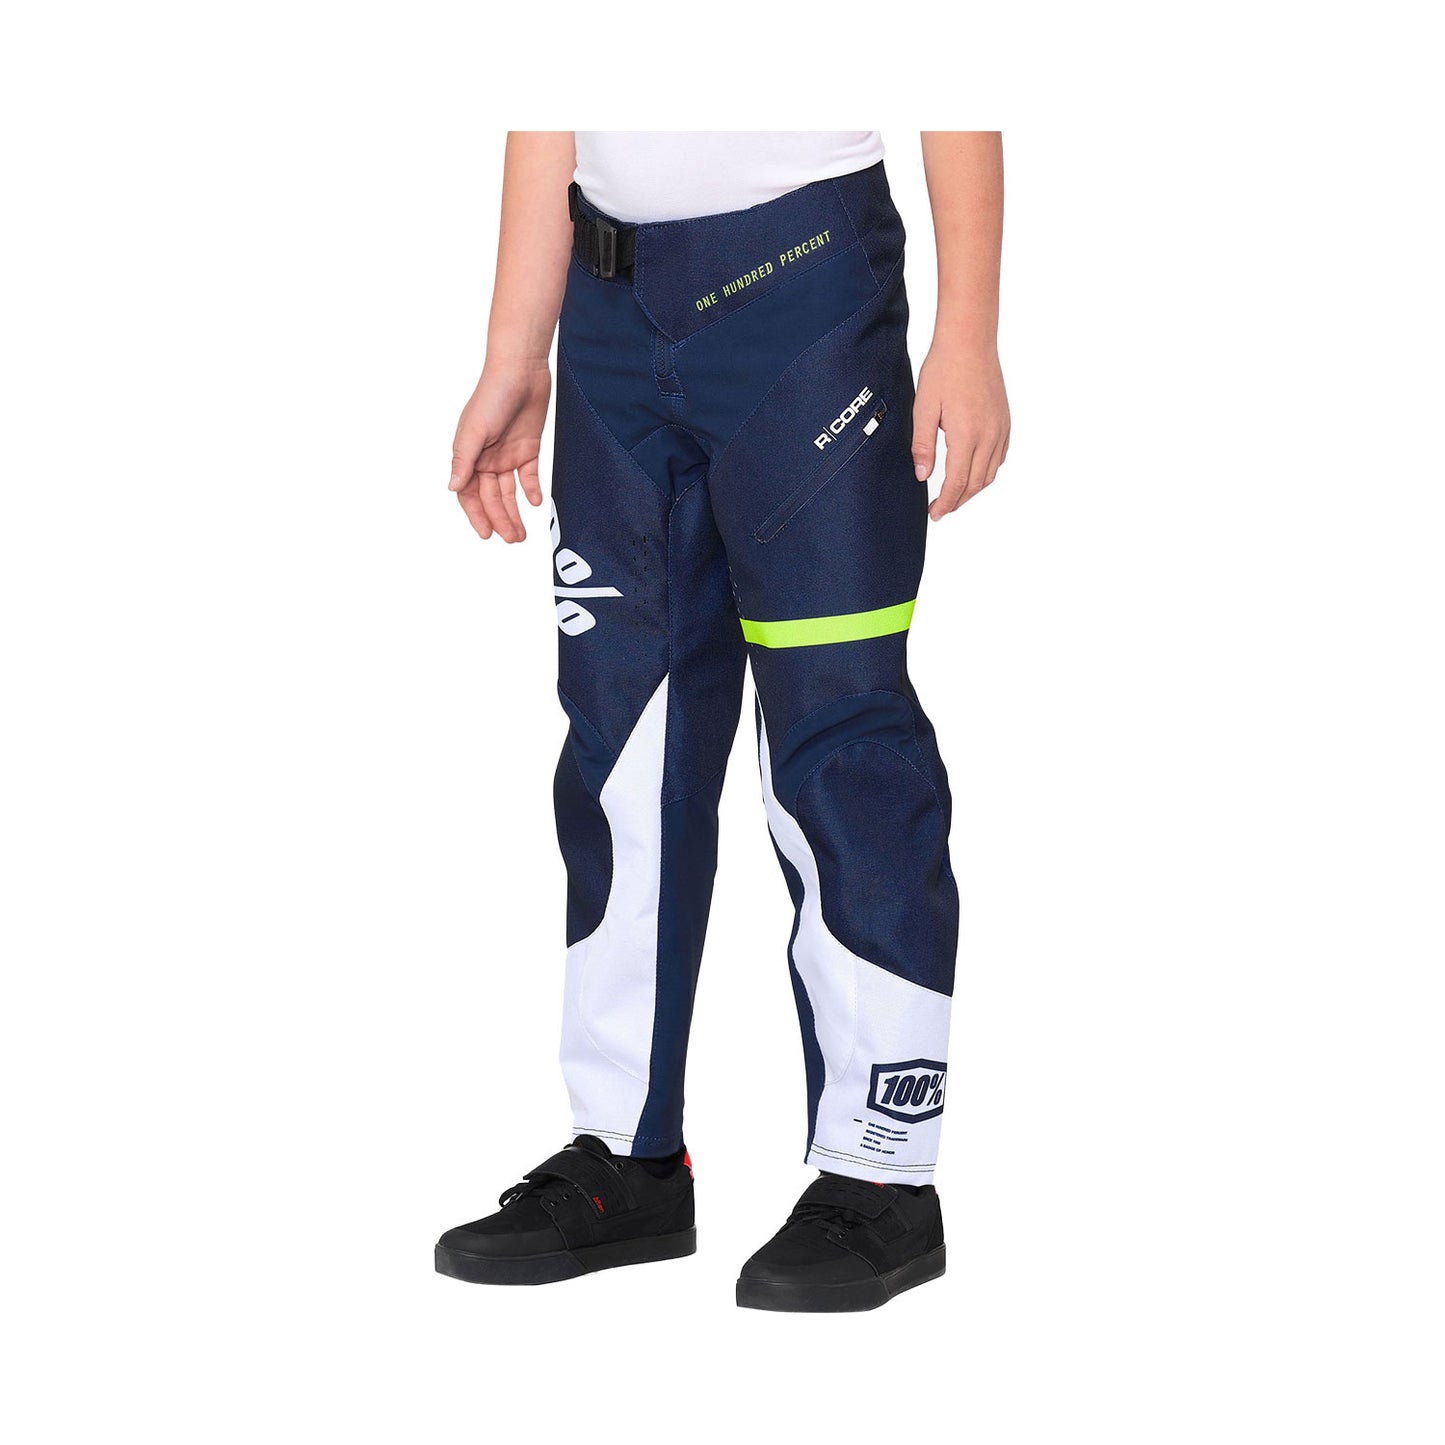 100 Percent R-Core Youth DH Pants - Youth M-24 - Dark Blue - Yellow